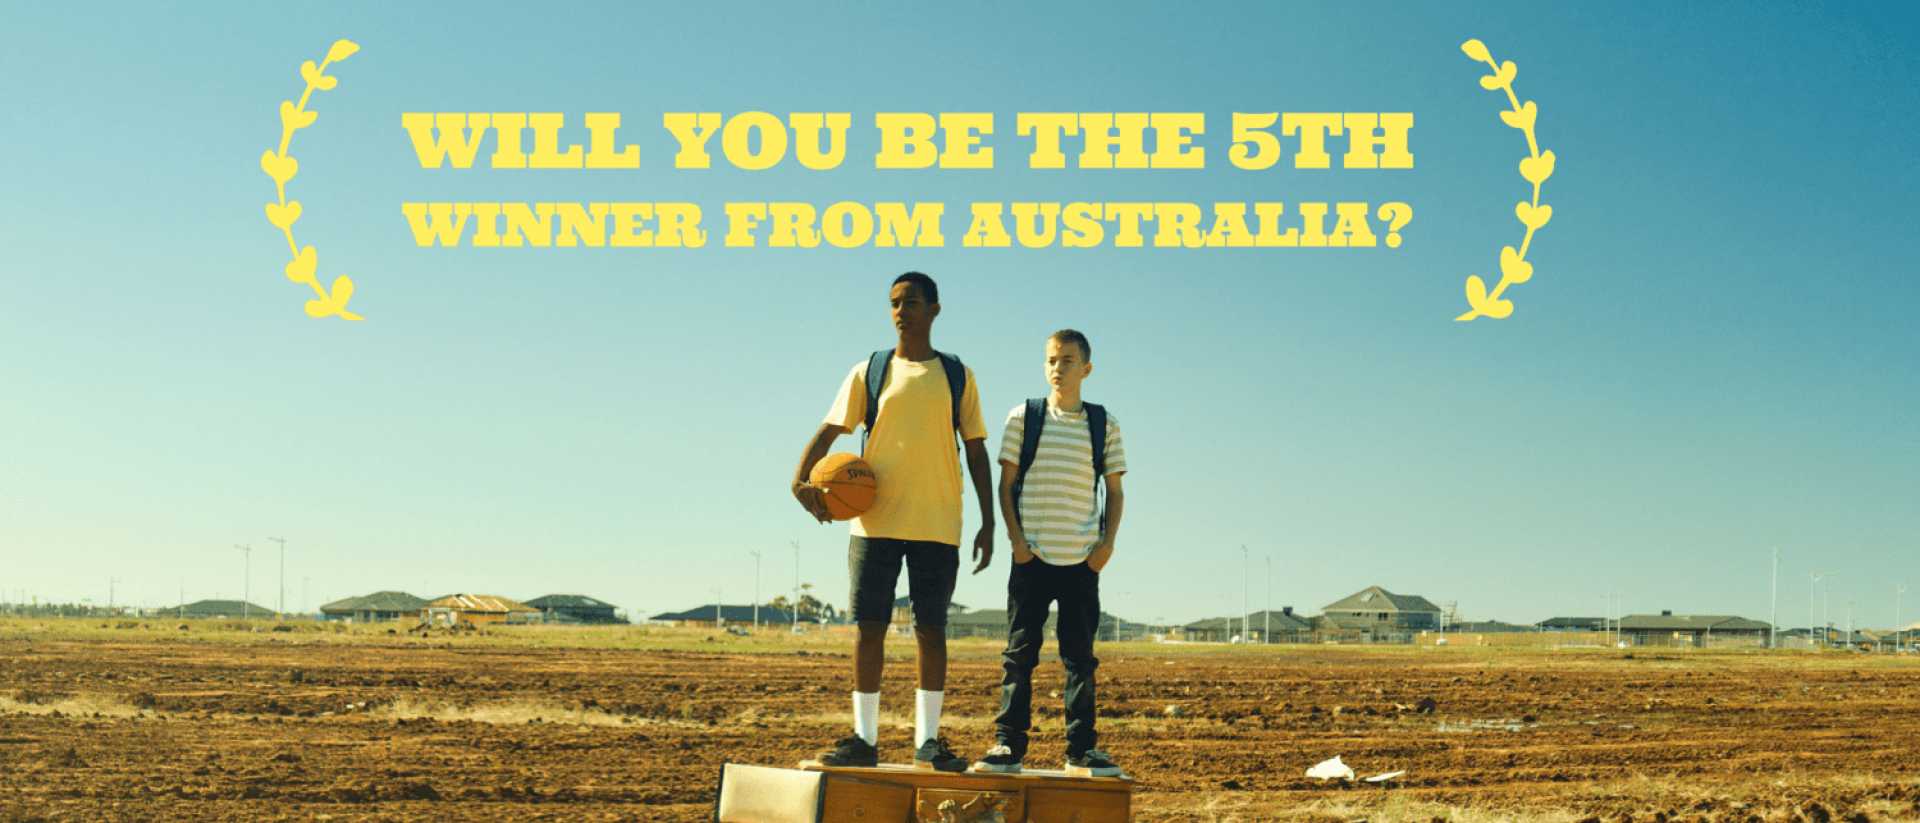 two teenagers standing on an old chest of drawers in a field. Text over the top reads Will you be the 5th winner from Australia?